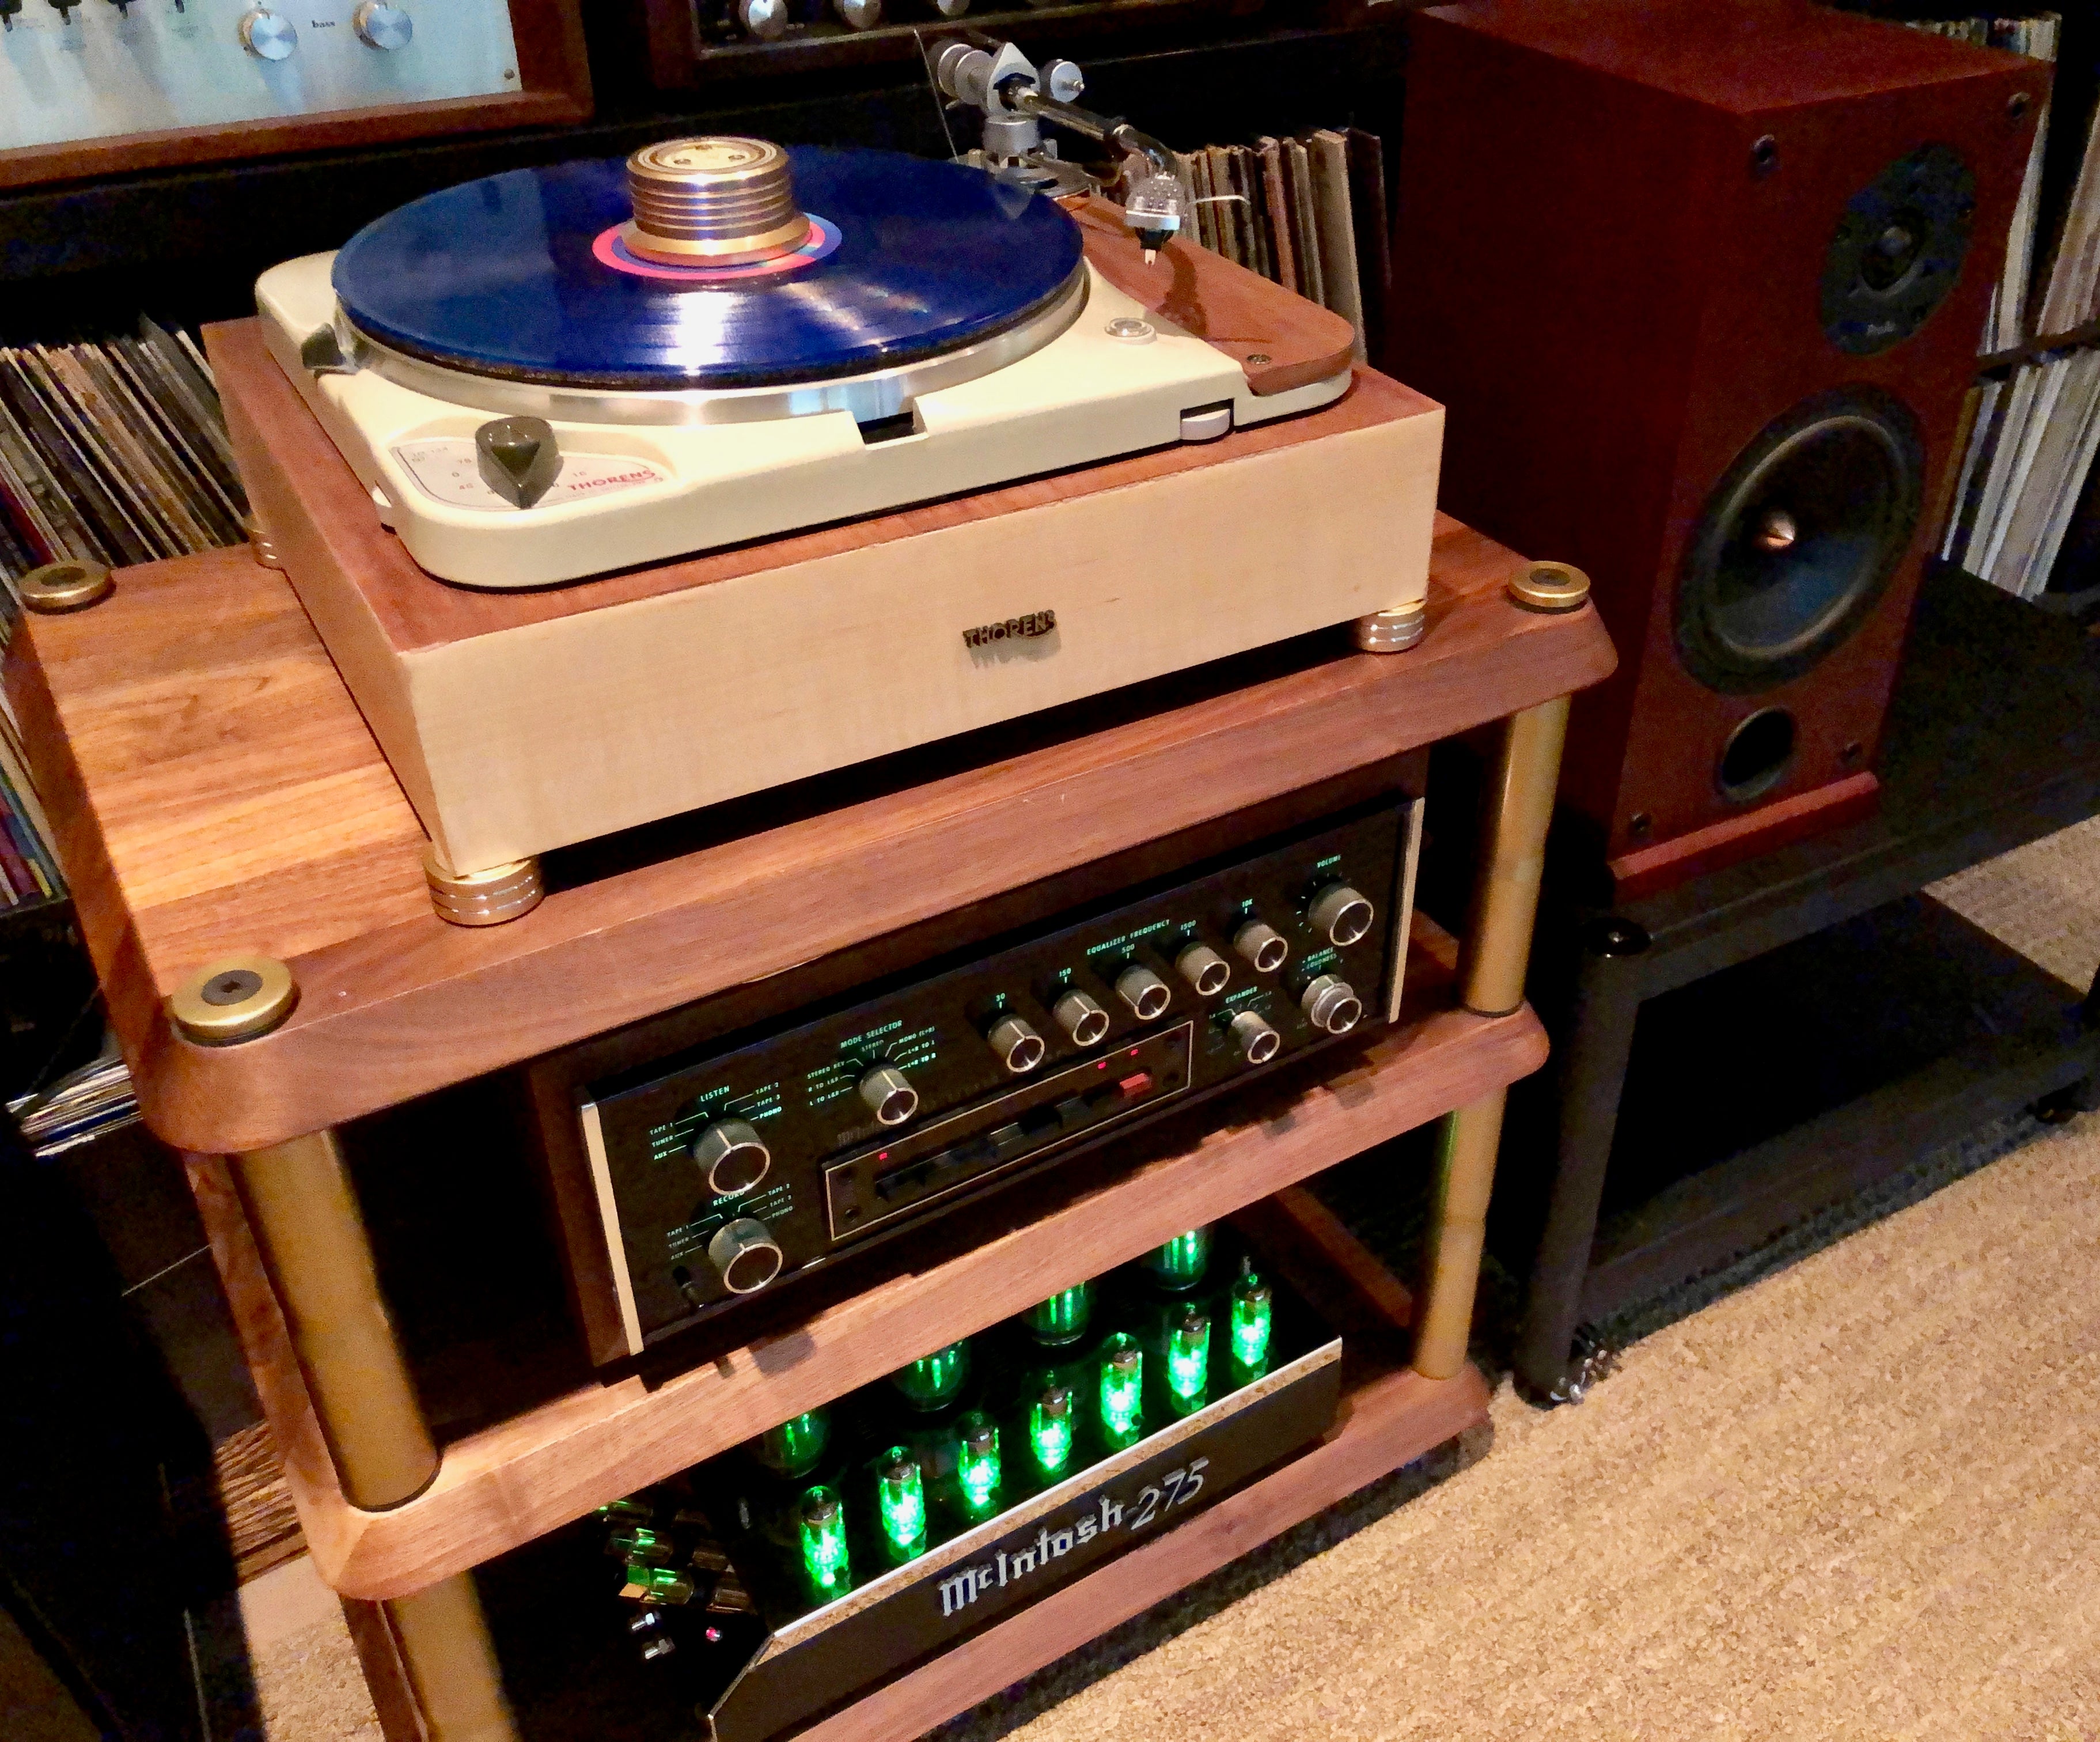 Stereo Concierge System of the Week - Featuring a SkyFi Exclusive Turntable